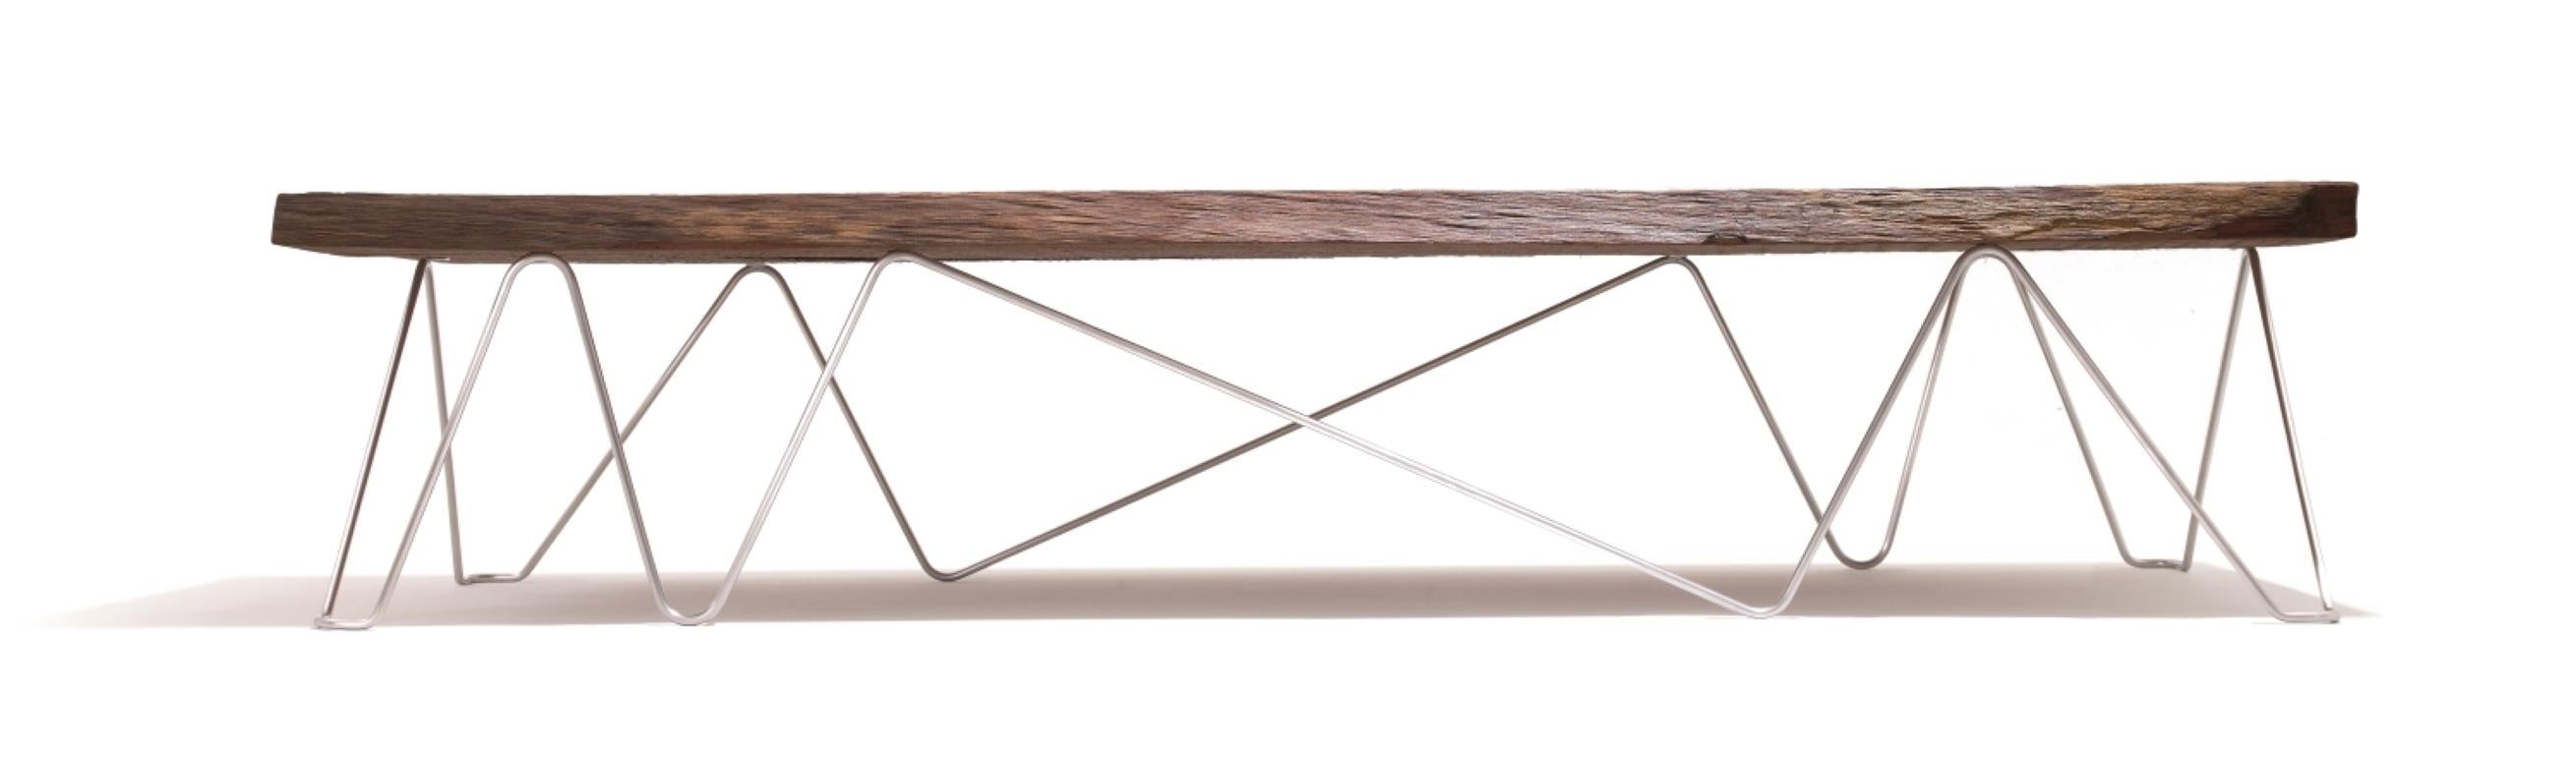 Reflect takes its name from the way the base mimics the changing landscape of Fiordland in the South Island of New Zealand. The non-geometric form is reflected on opposite sides yet as you move around the table, the perspective and angles change